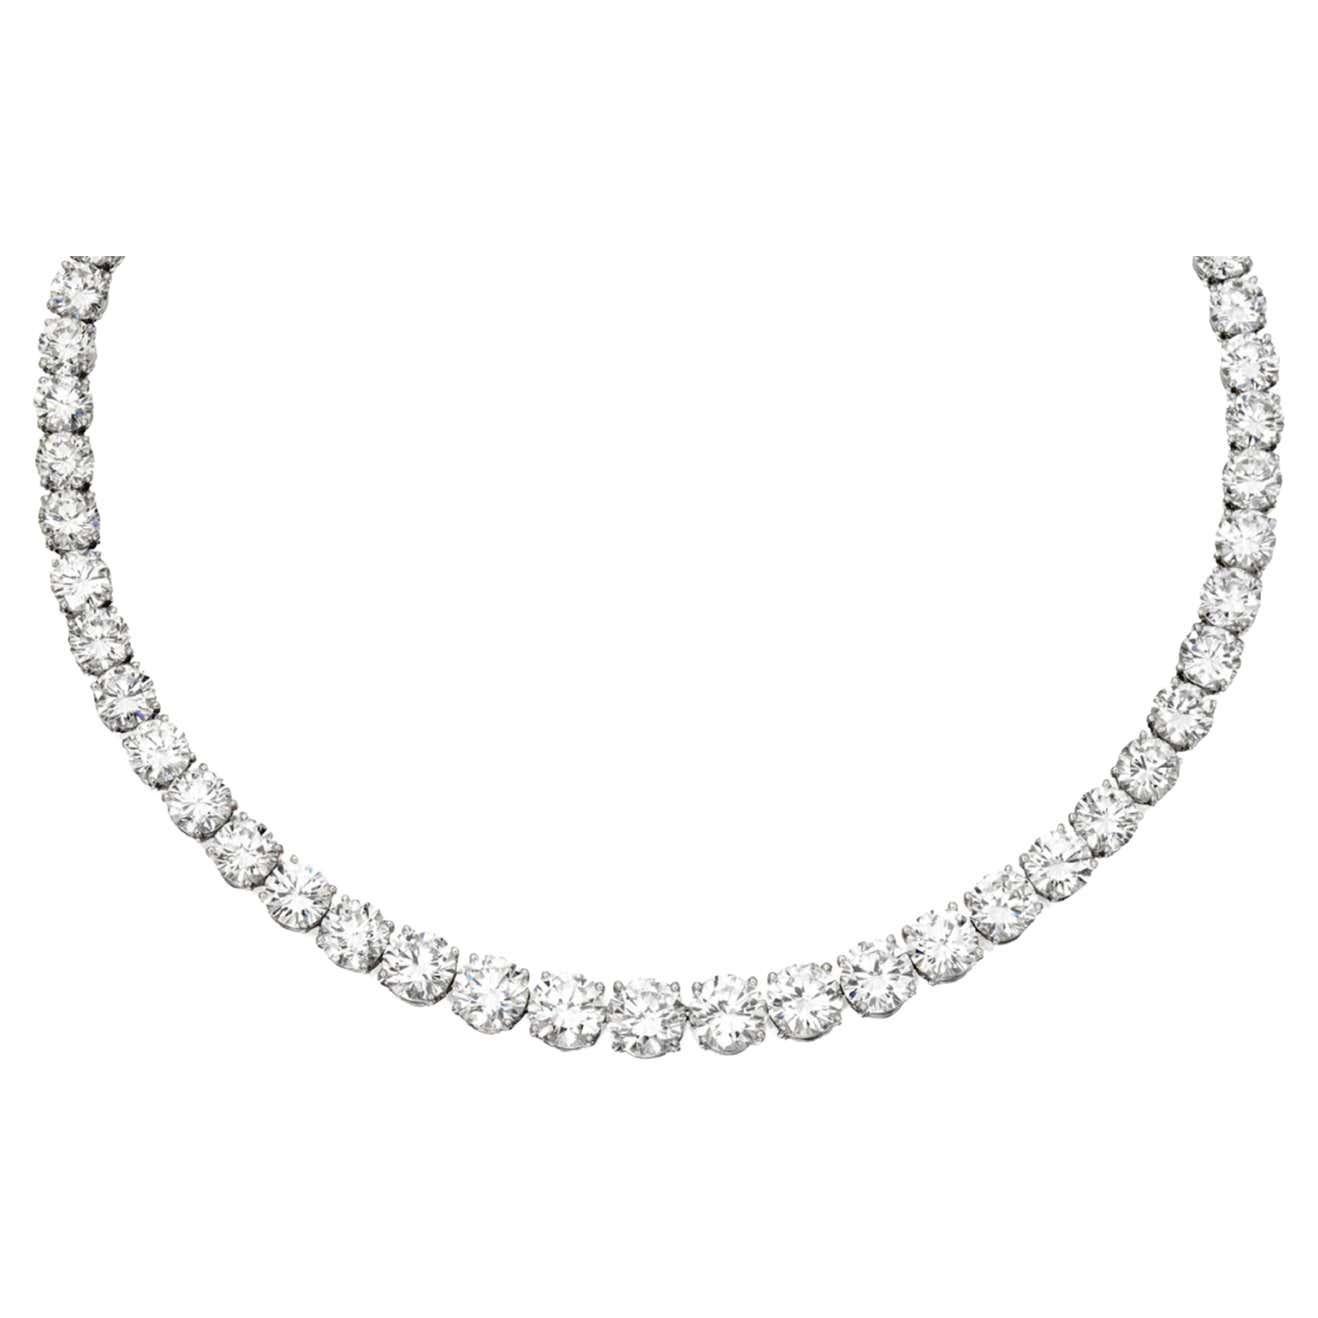 Modern 25 Carat Natural Diamond Full Tennis Necklace For Sale